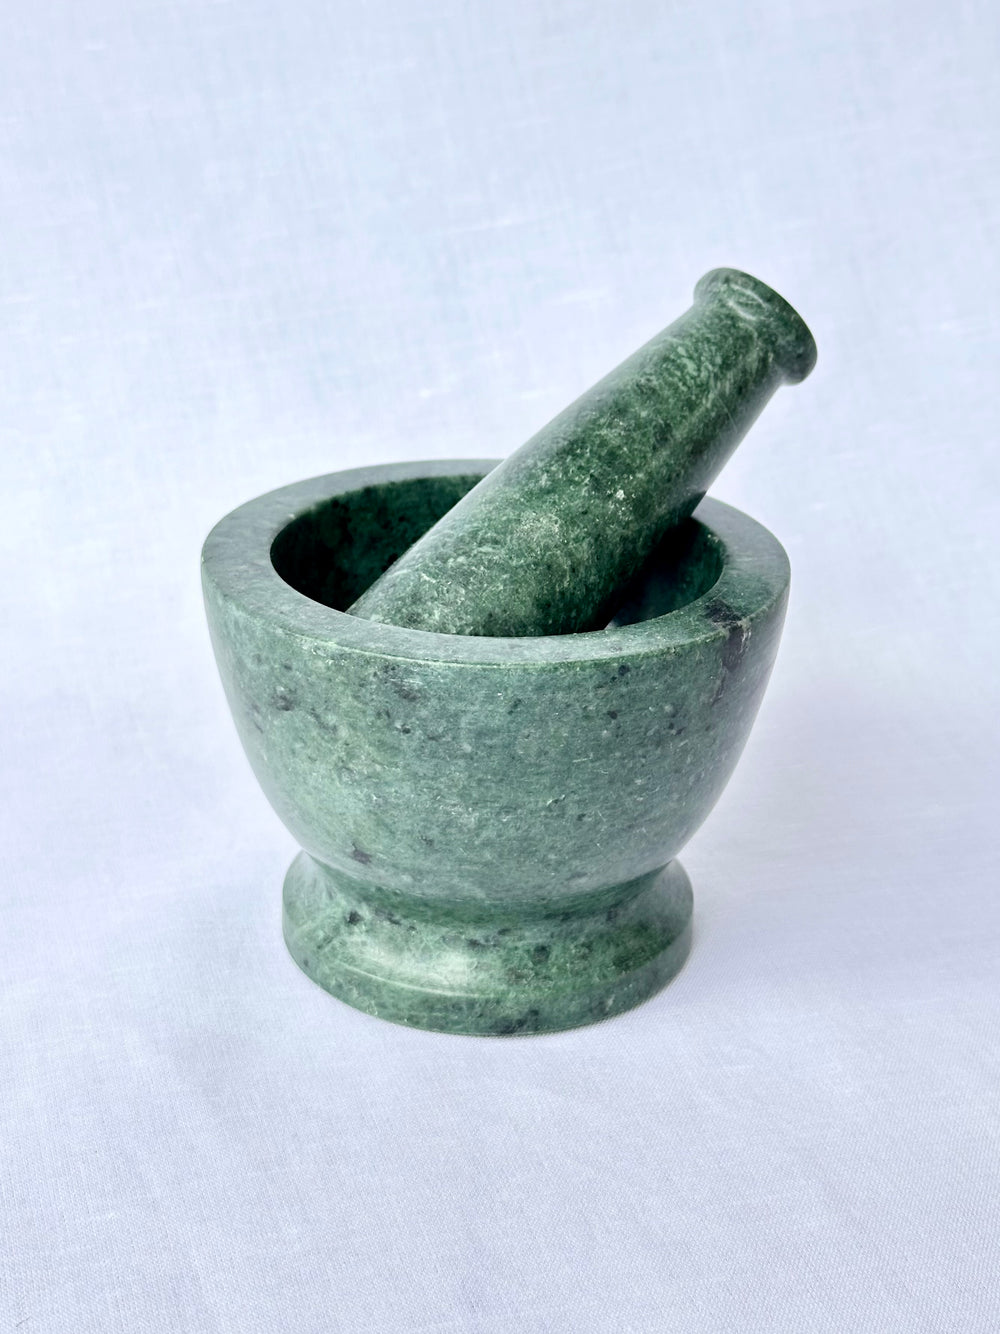 Green Marble Mortar and Pestle